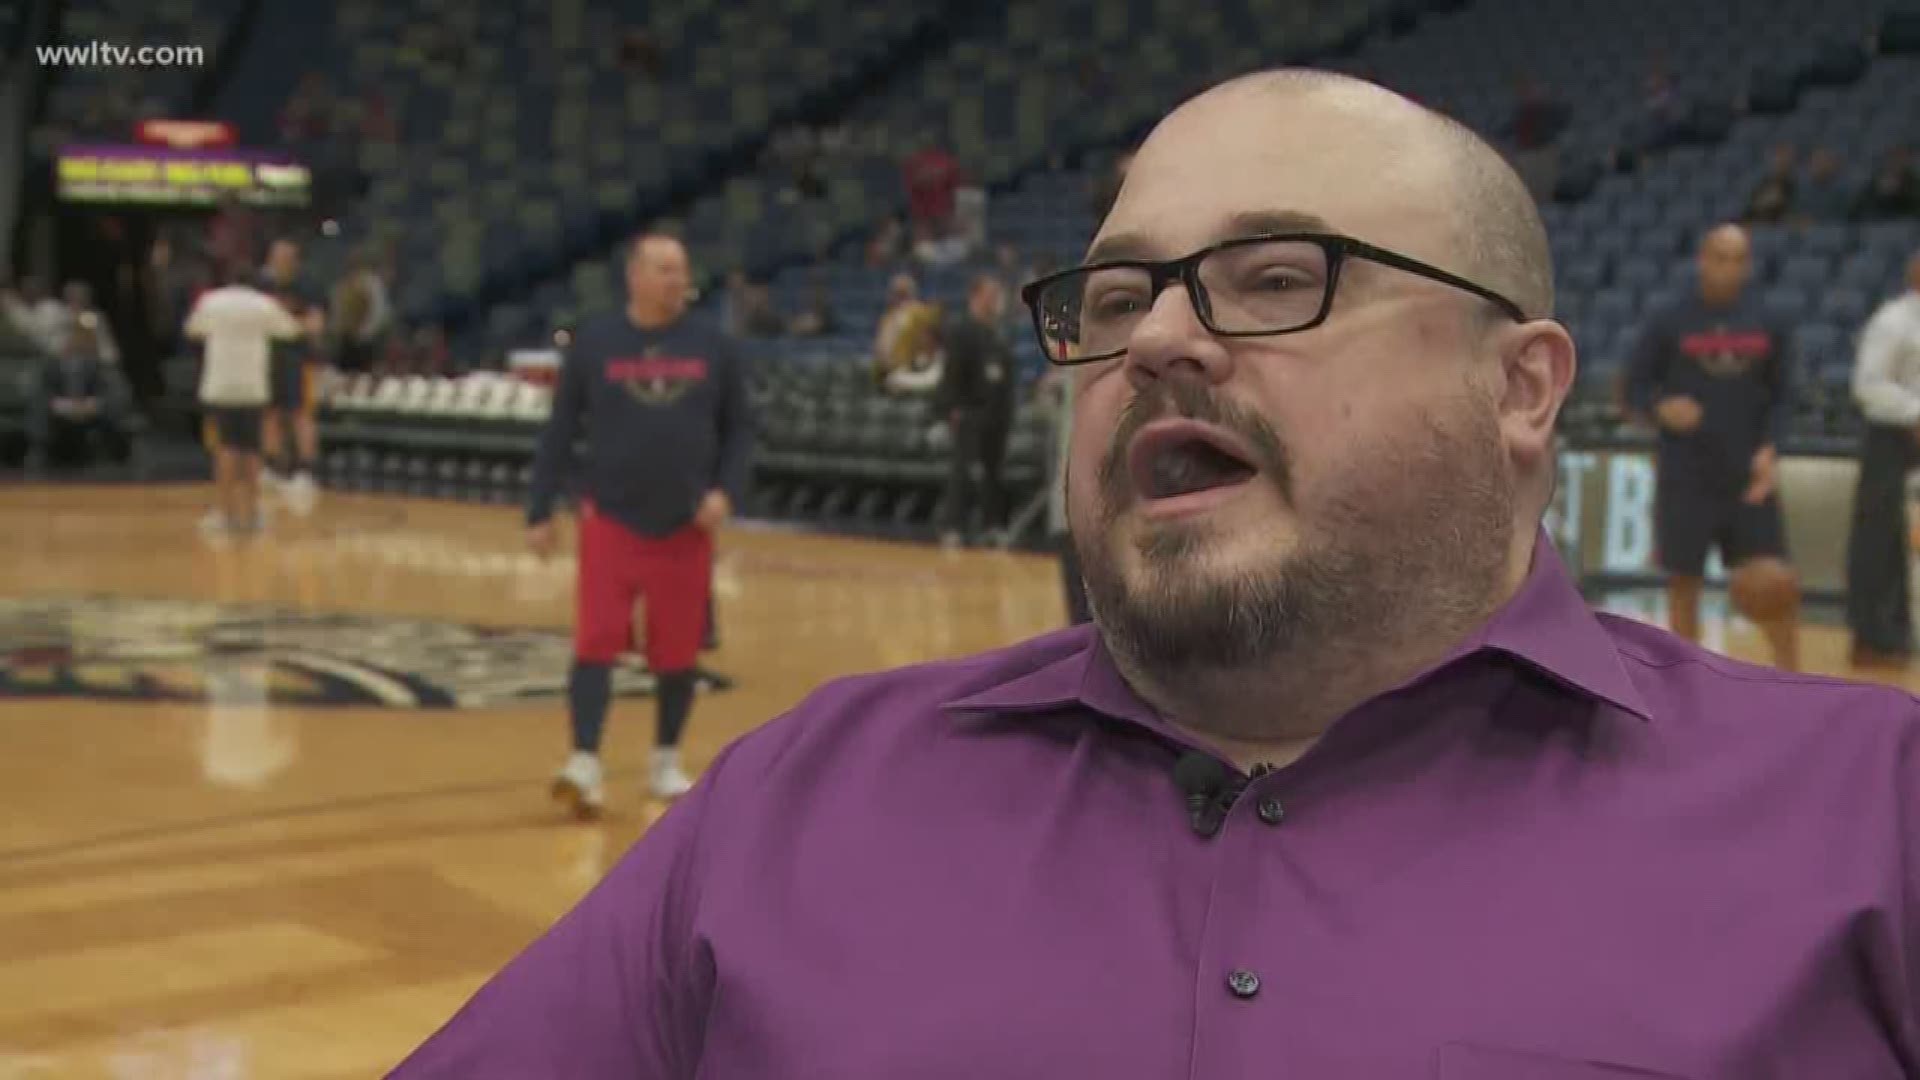 Chuck Edwards, the PA announcer for the Pelicans and Saints game host, has died. He was 49-years old.